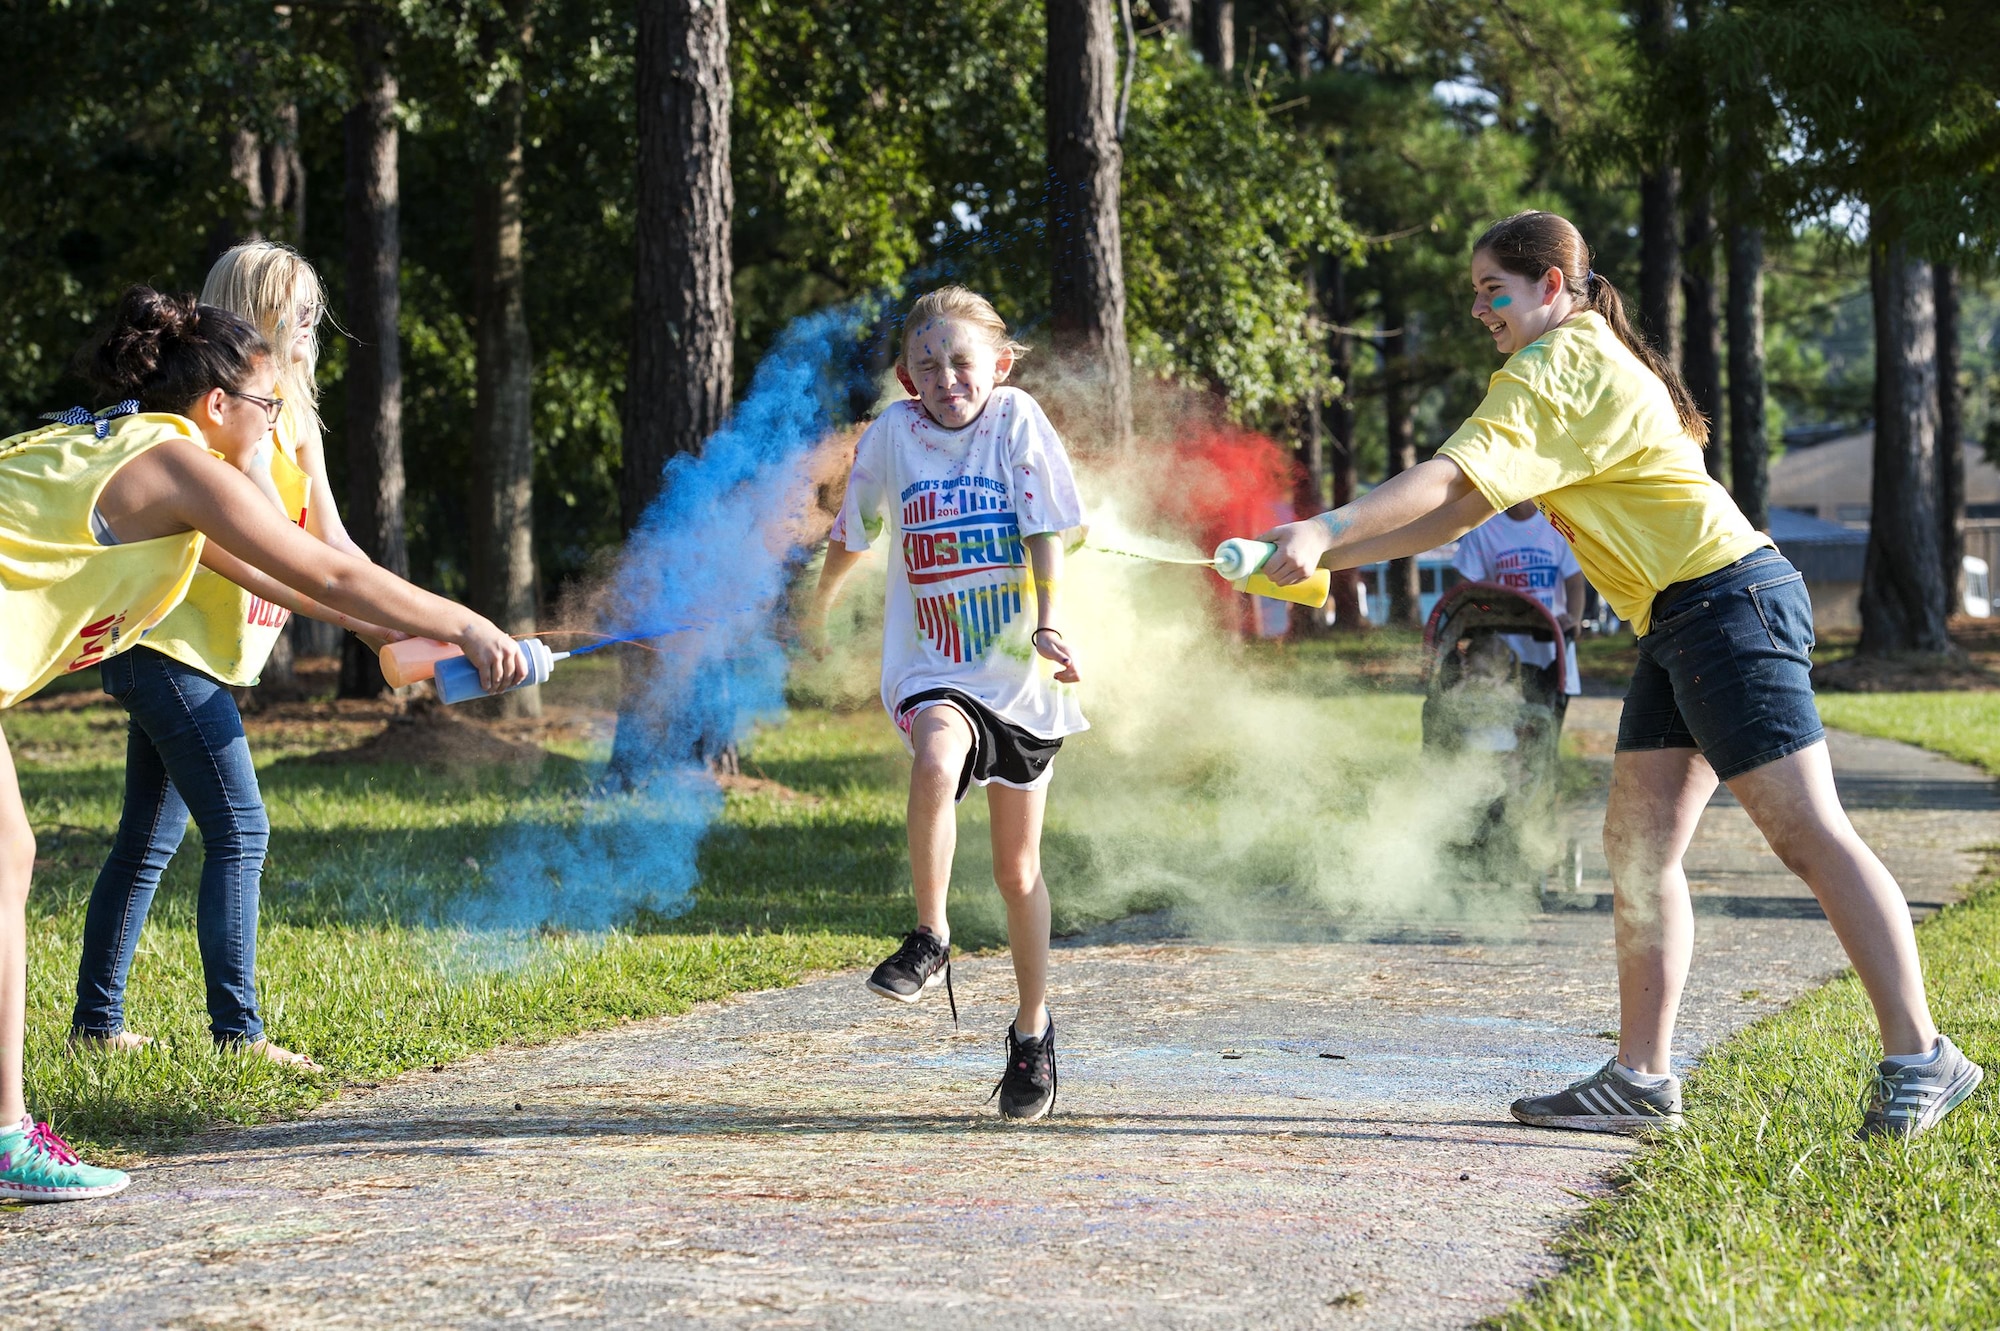 A participant runs through a ‘splash zone’ during a Kid’s Color Run, Sept. 20, 2016, at Moody Air Force Base, Ga. More than 150 runners participated in the run which was designed to get kids to exercise in a family friendly event. (U.S. Air Force photo by Airman 1st Class Janiqua P. Robinson)